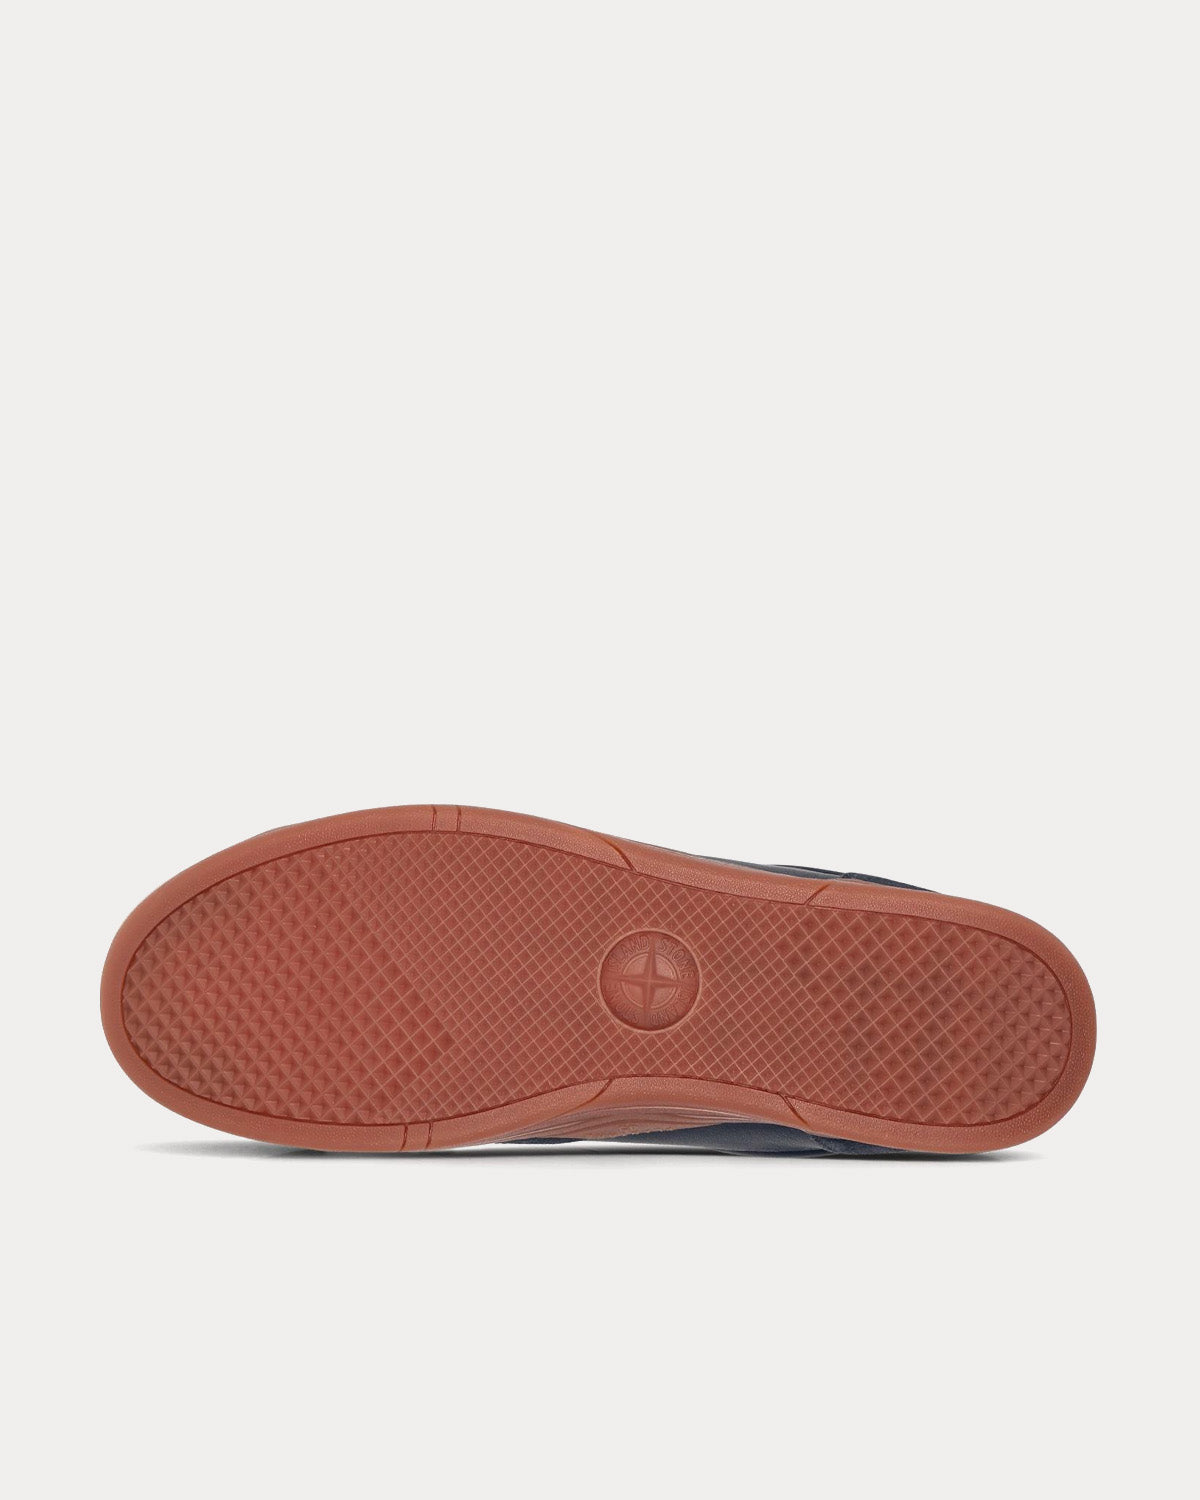 Stone Island - S0301 Blue Low Top Sneakers